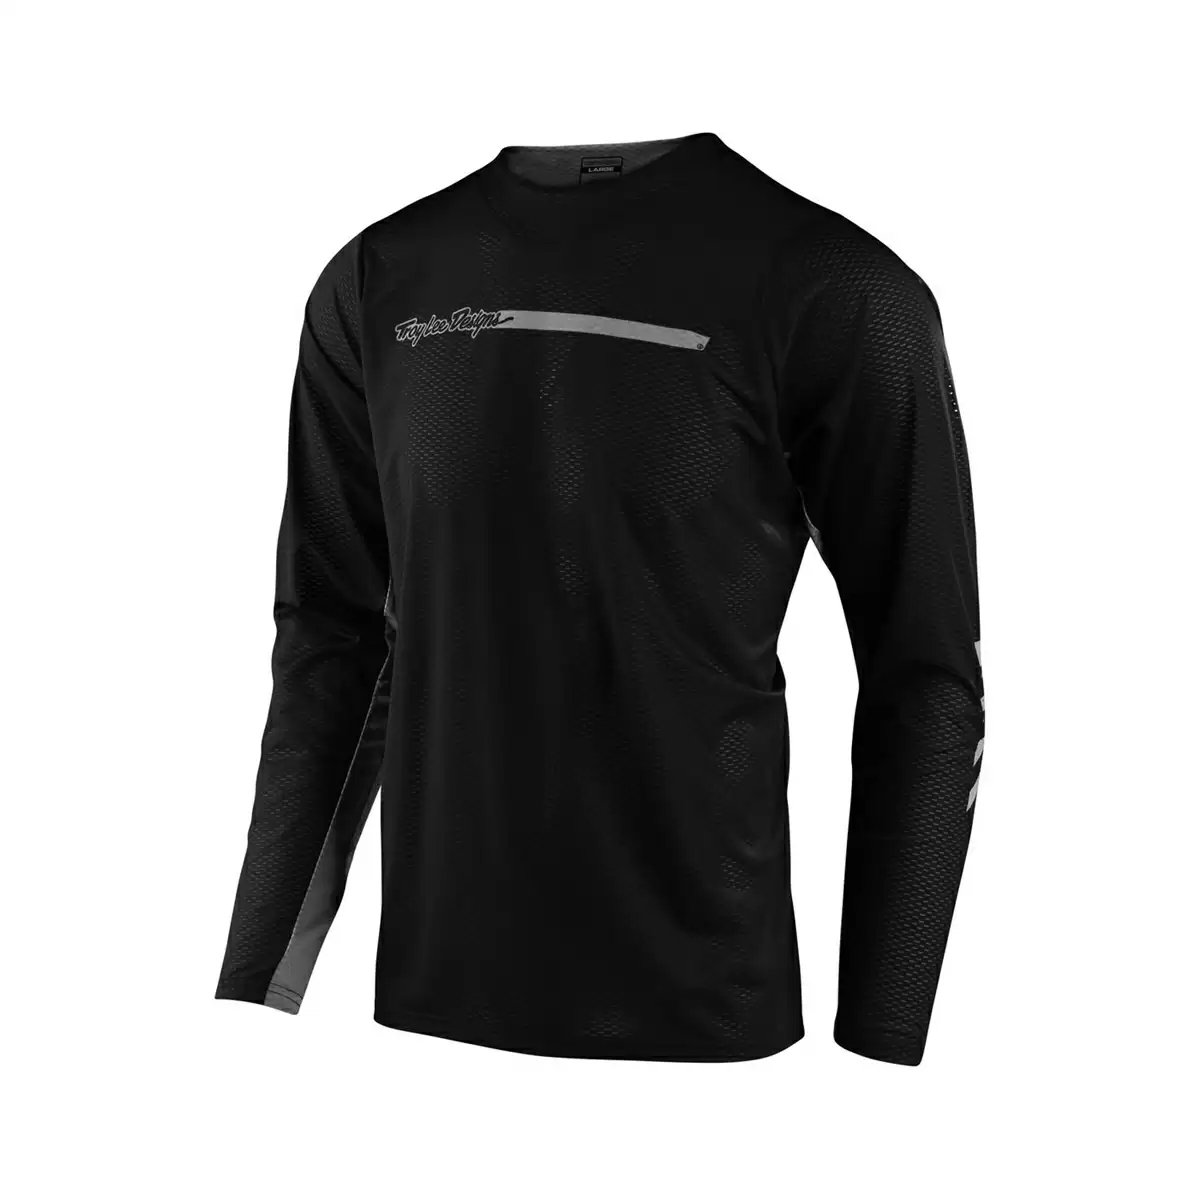 Jersey Skyline Air Channel Long-Sleeve Black Size XL - image